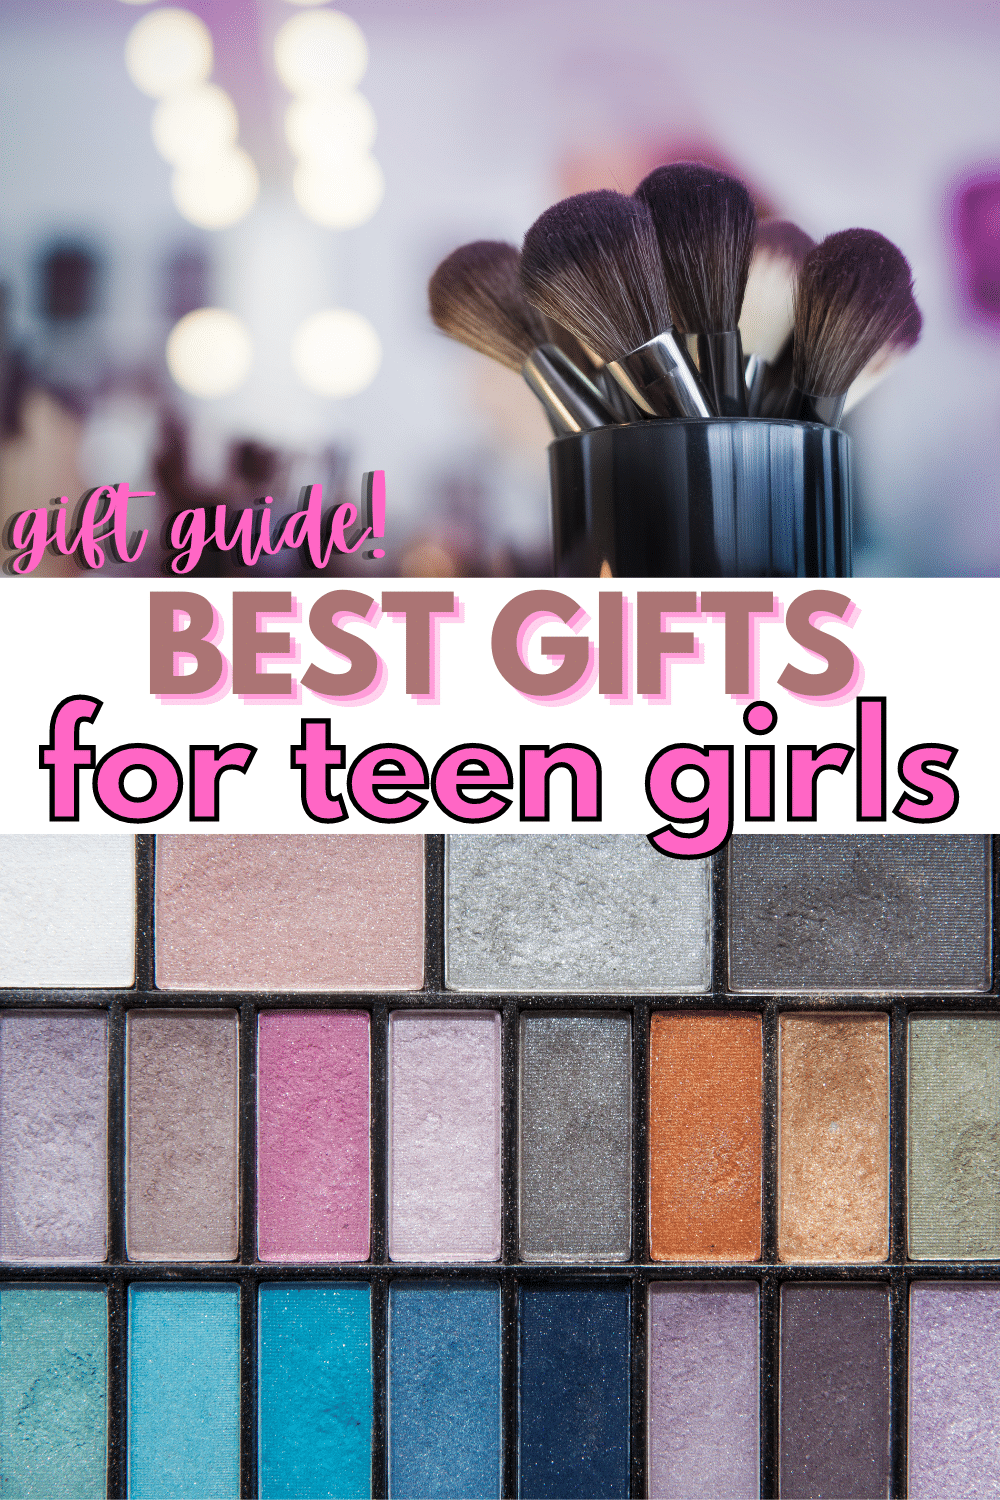 Whether it's for a birthday, holiday, or just to show appreciation, finding the perfect gift for teen girls can be a challenging task. However, our collection of best gifts for teen girls makes the